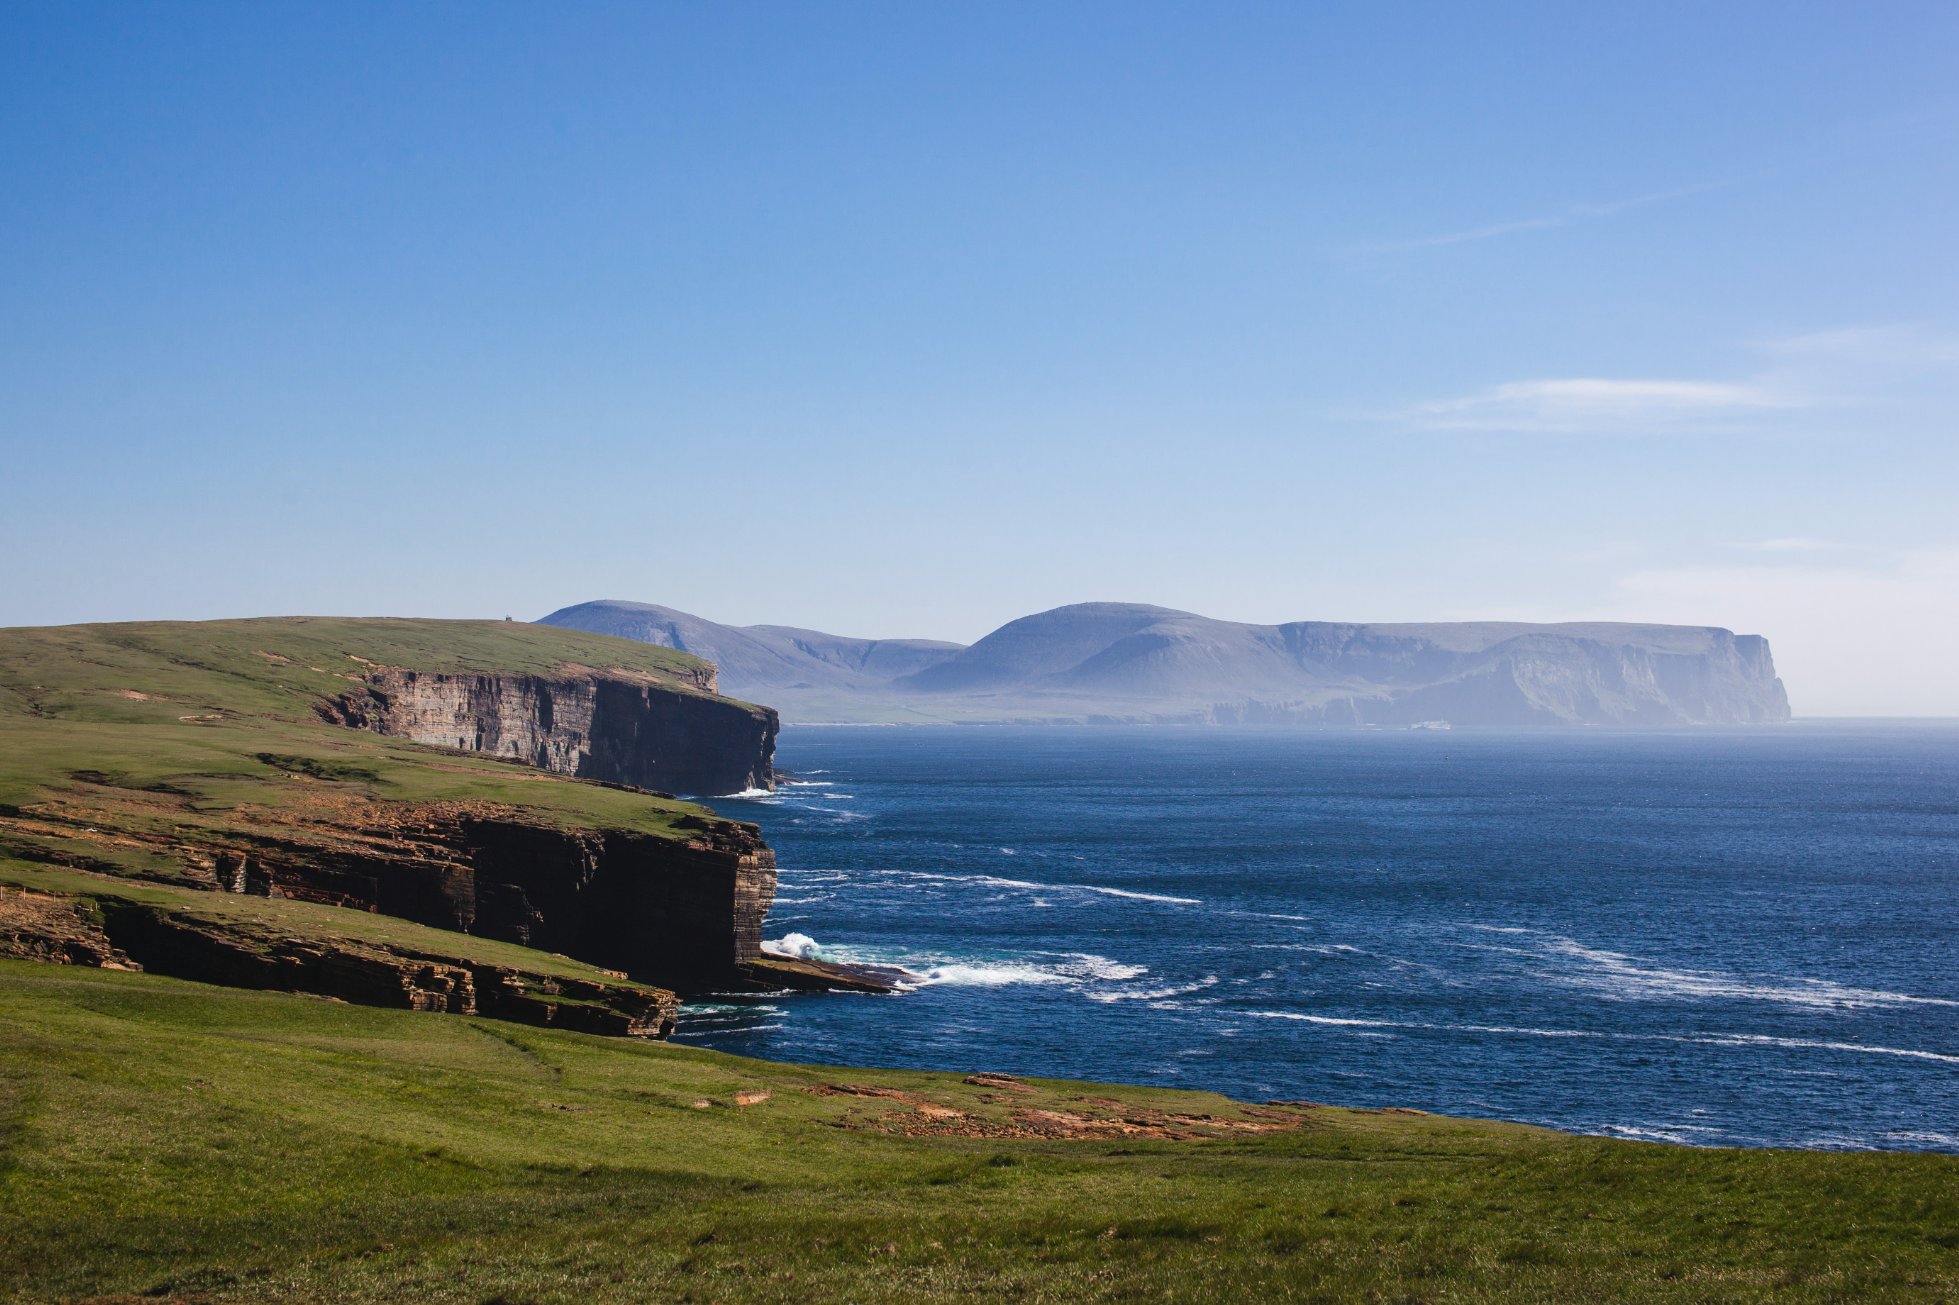 View towards Hoy from the Orkney mainland's west coast - image by Louise Bichan